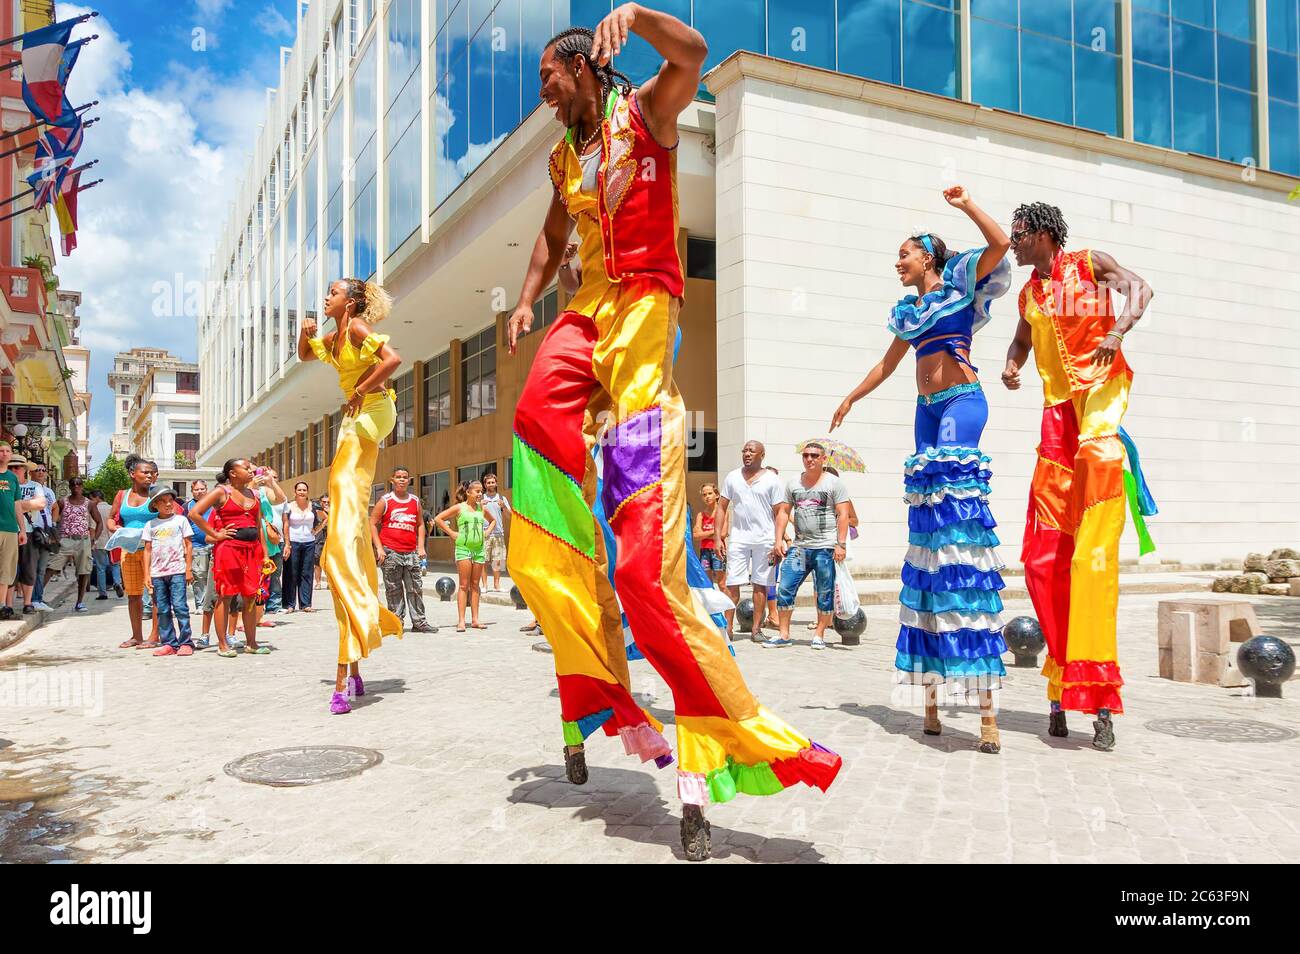 Cuban dancers on stilts at a carnival in Old Havana Stock Photo